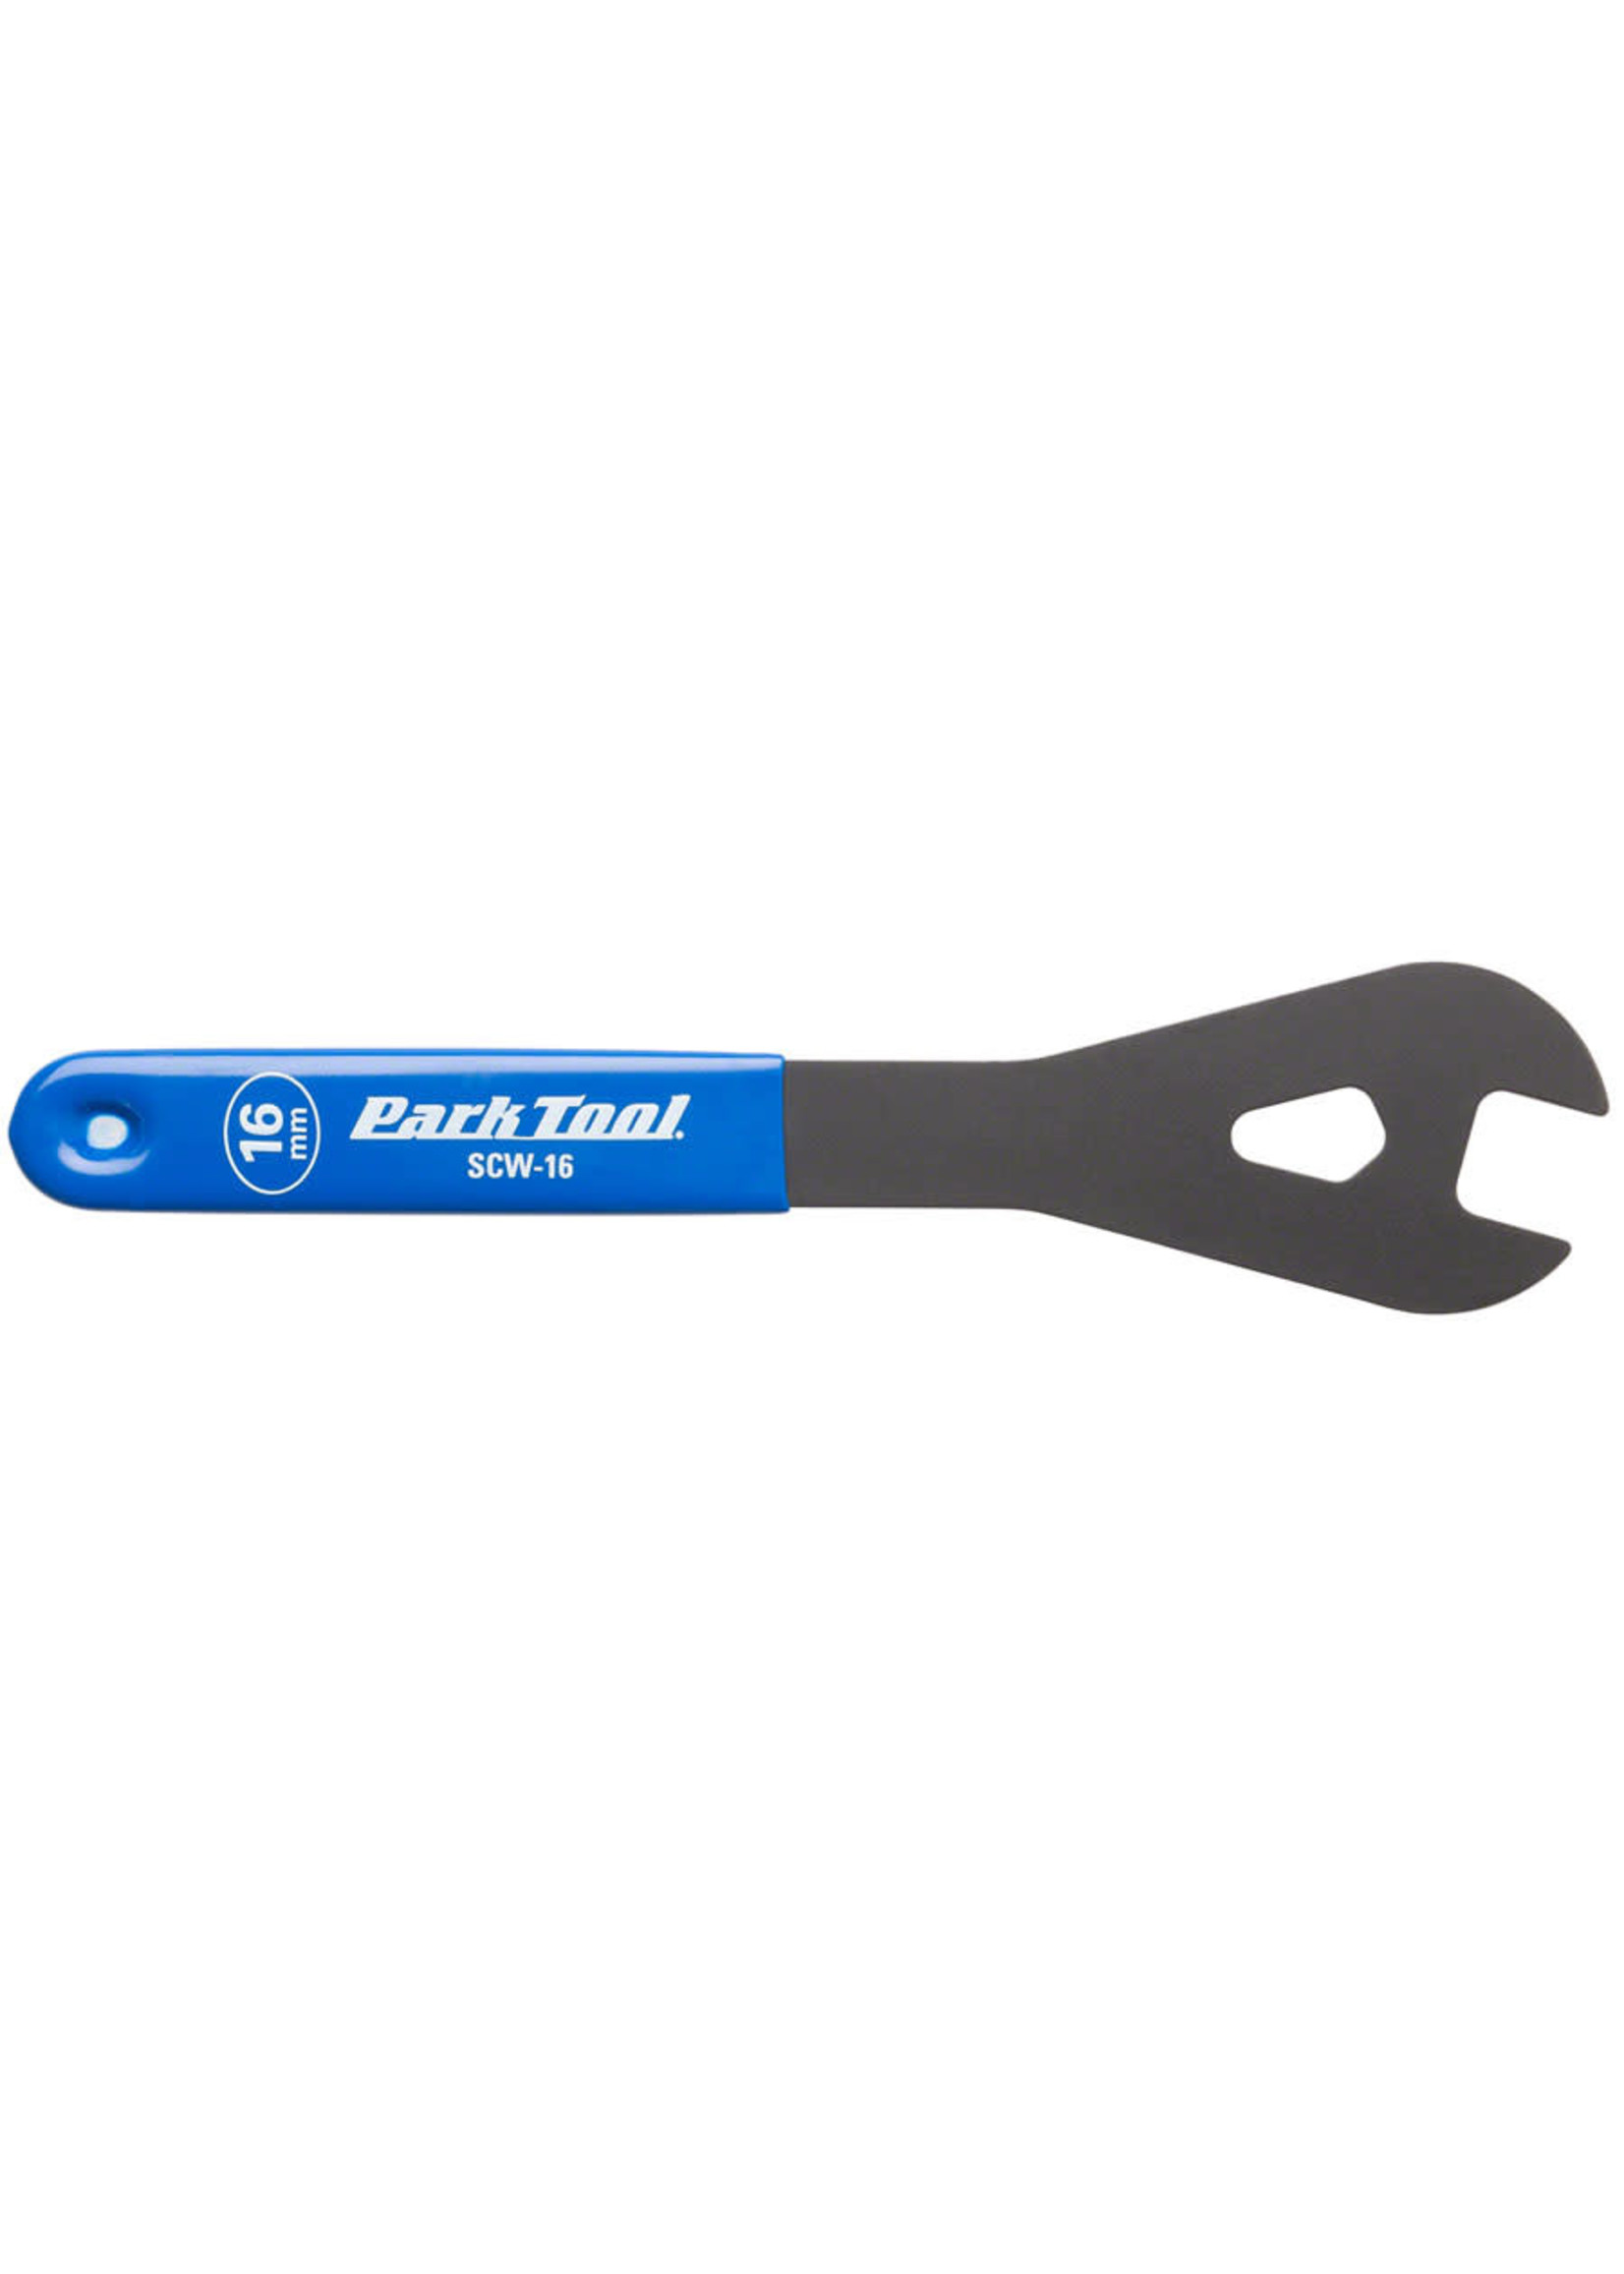 Park Tool 16mm Shop Cone Wrench